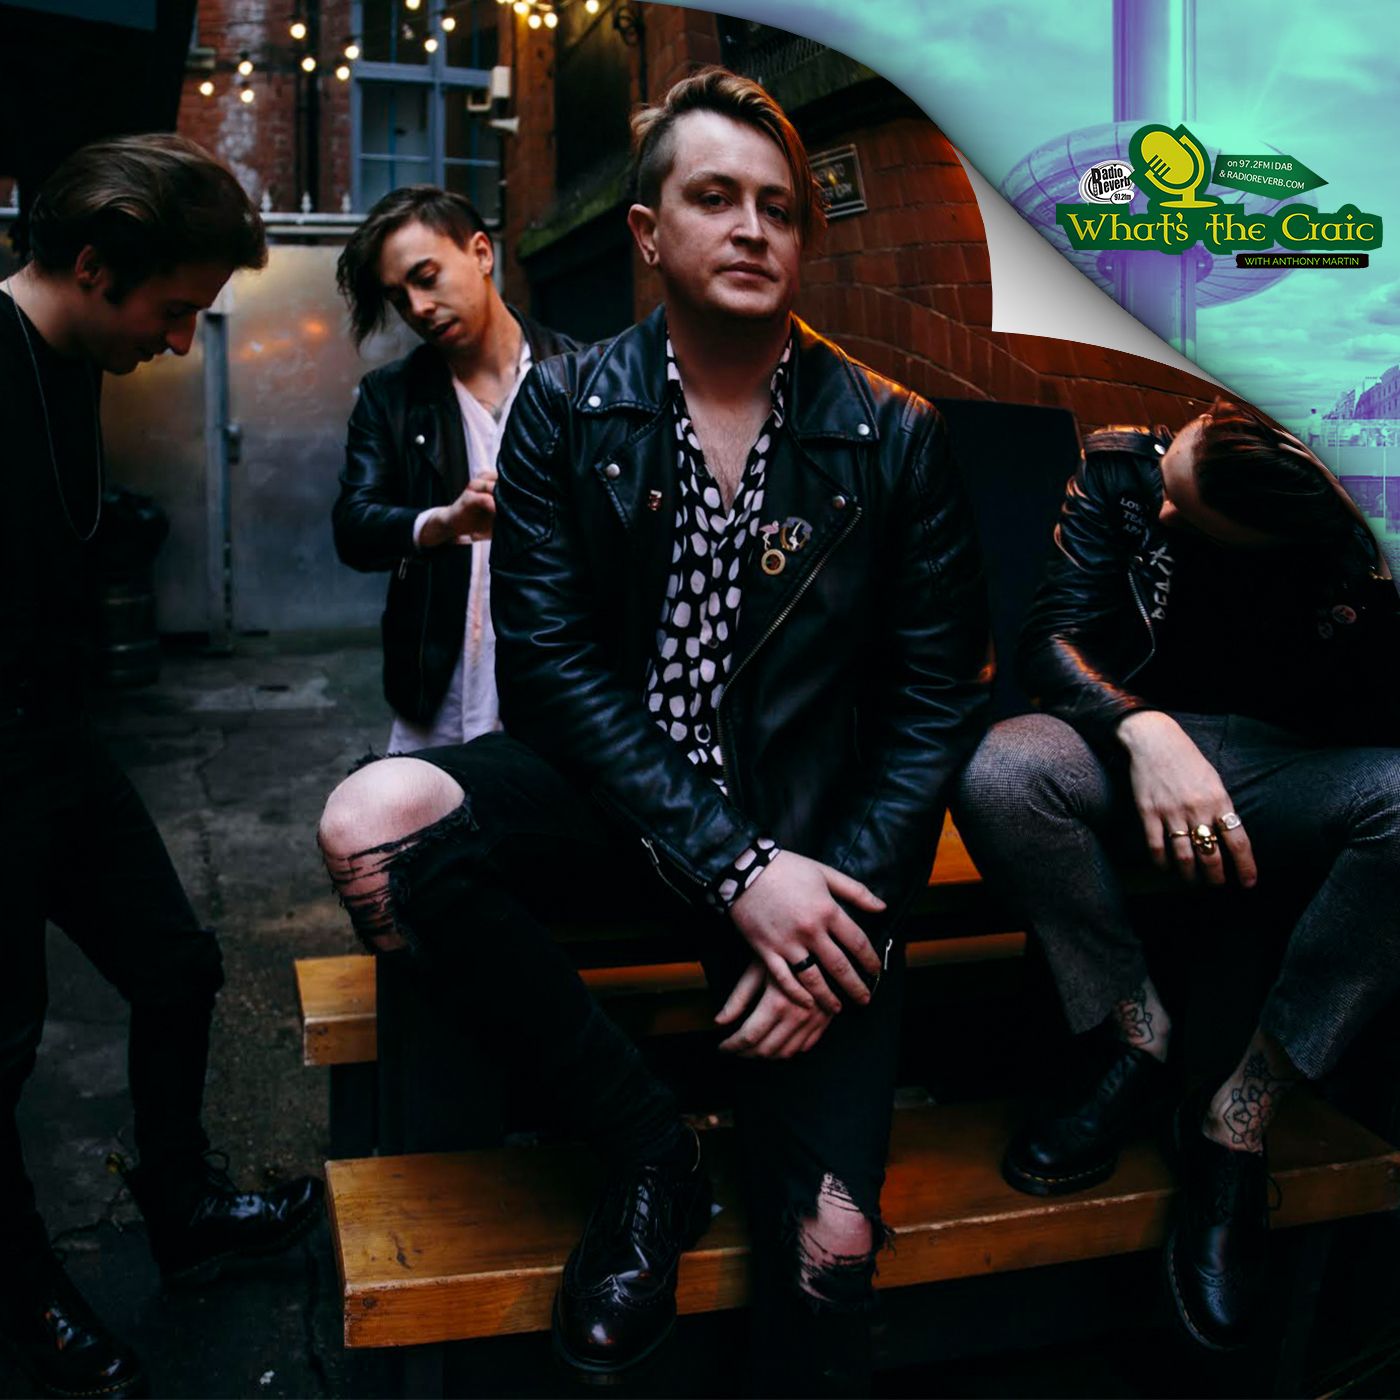 A chat with Otherkin post-debut album going to Number 2